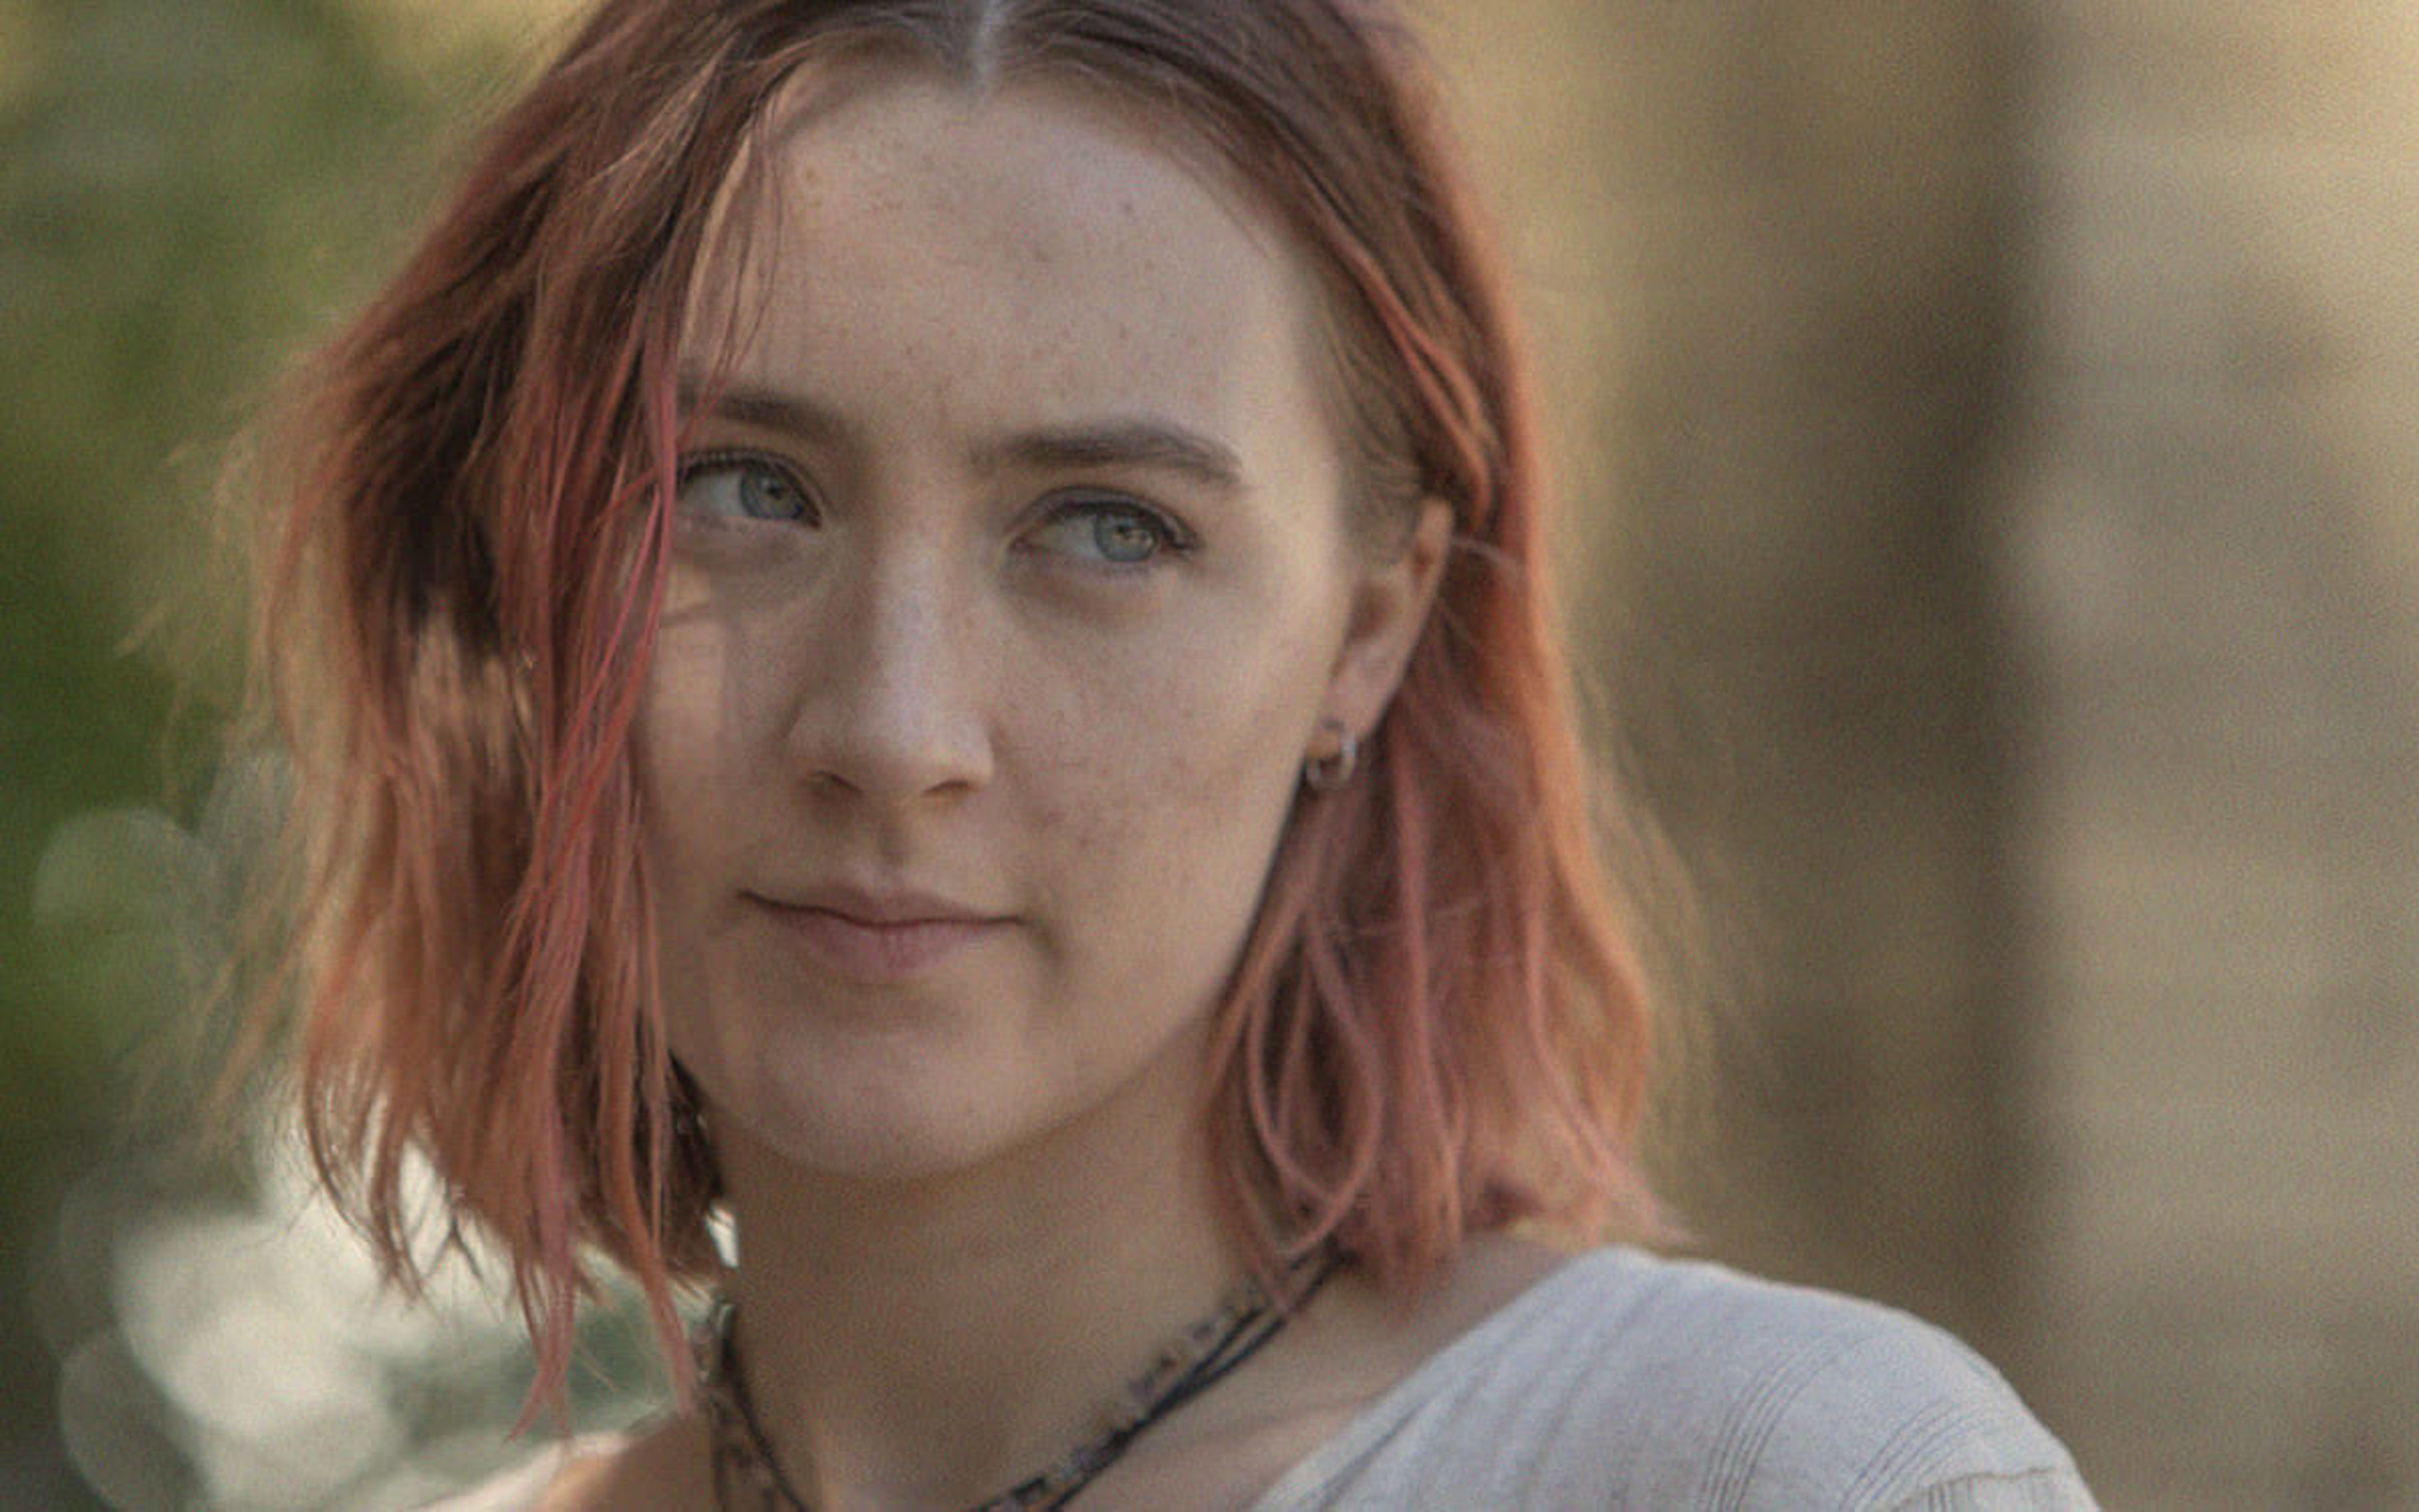 <p><a href="https://www.youtube.com/watch?v=cNi_HC839Wo">One of the most acclaimed films of the last decade</a>, <em>Lady Bird</em> won the Golden Globe for Best Picture (Musical or Comedy). Star Saoirse Ronan, as Christine "Lady Bird" McPherson, was also awarded a Golden Globe for her starring role as a Catholic school girl trying to deal with young love, a complex relationship with her mother (Laurie Metcalf), and the need to possibly reinvent herself.   </p>